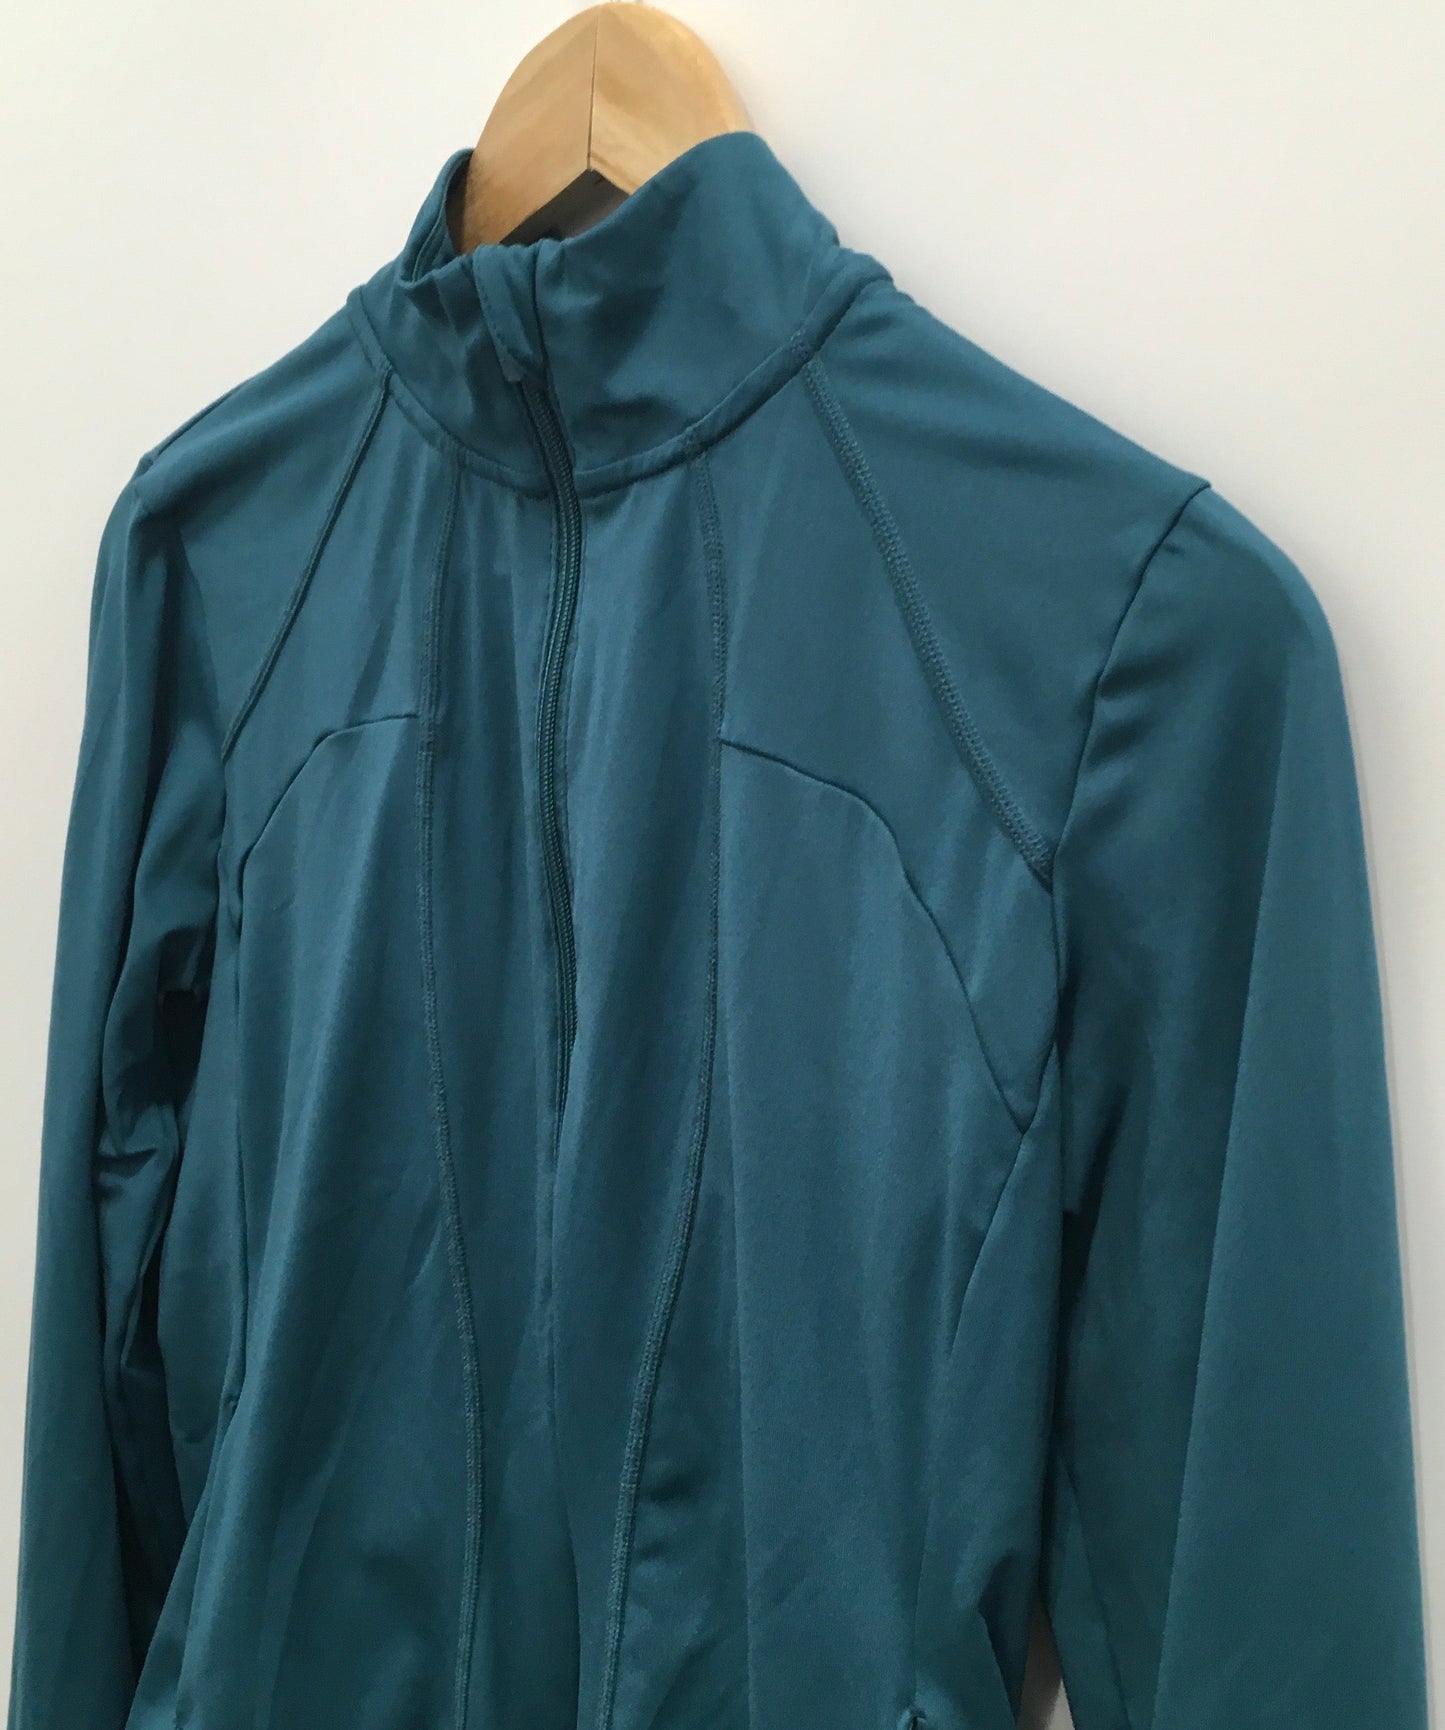 Athletic Jacket By Xersion  Size: S